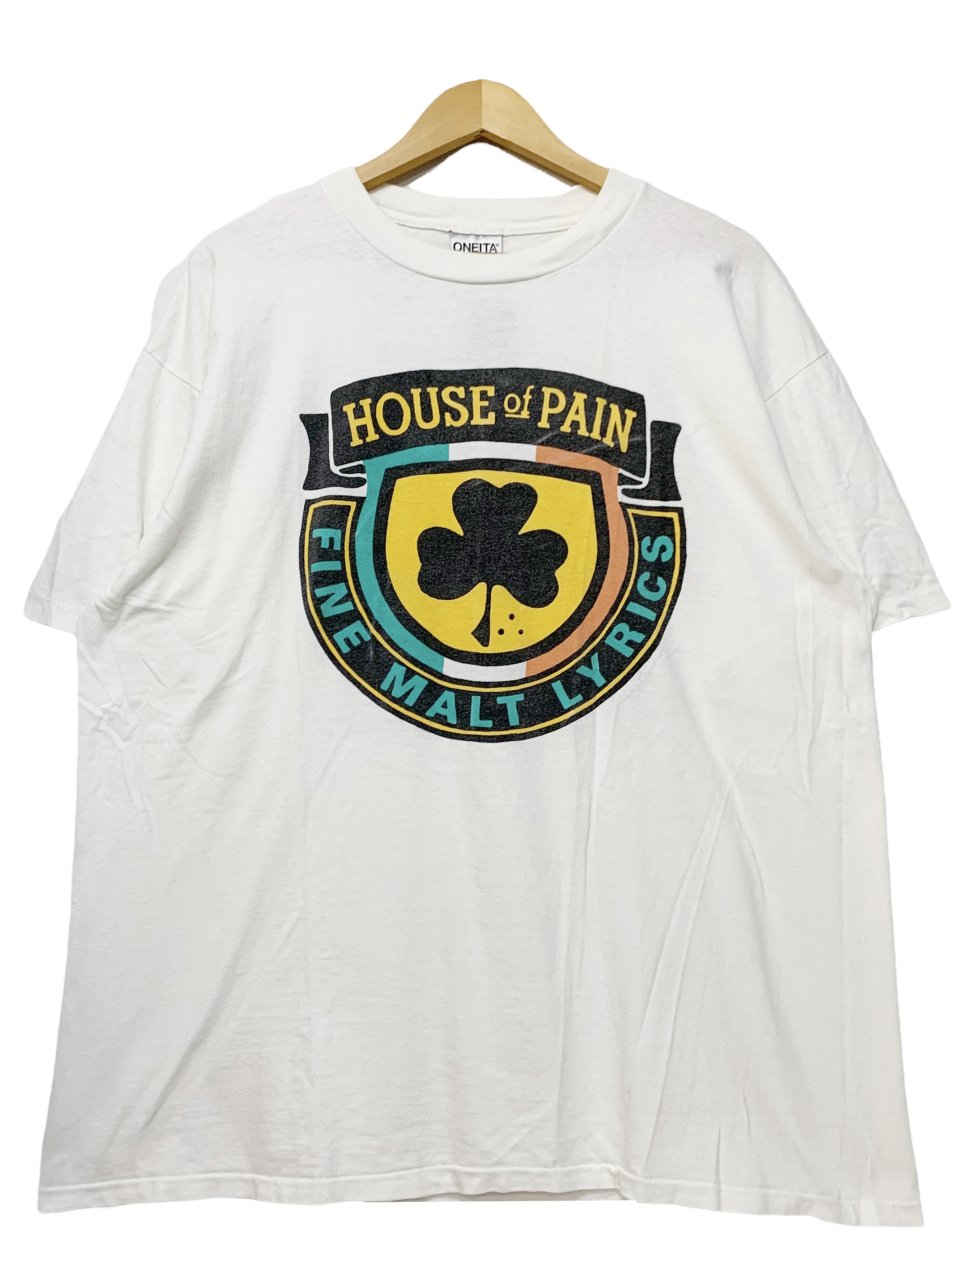 90s HOUSE of PAIN 